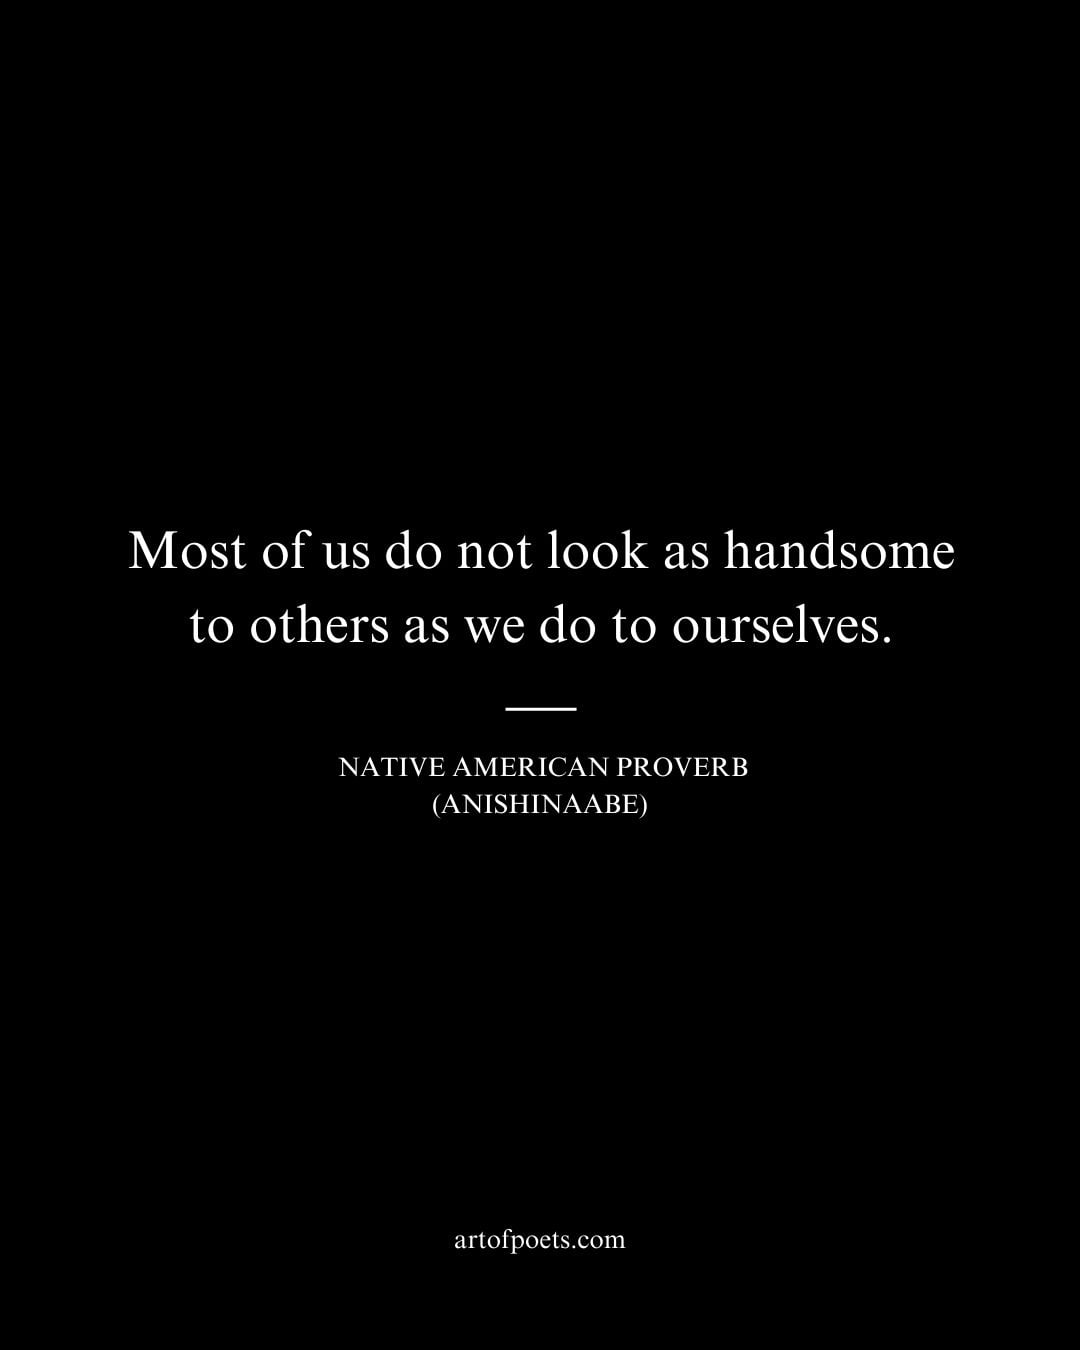 Most of us do not look as handsome to others as we do to ourselves